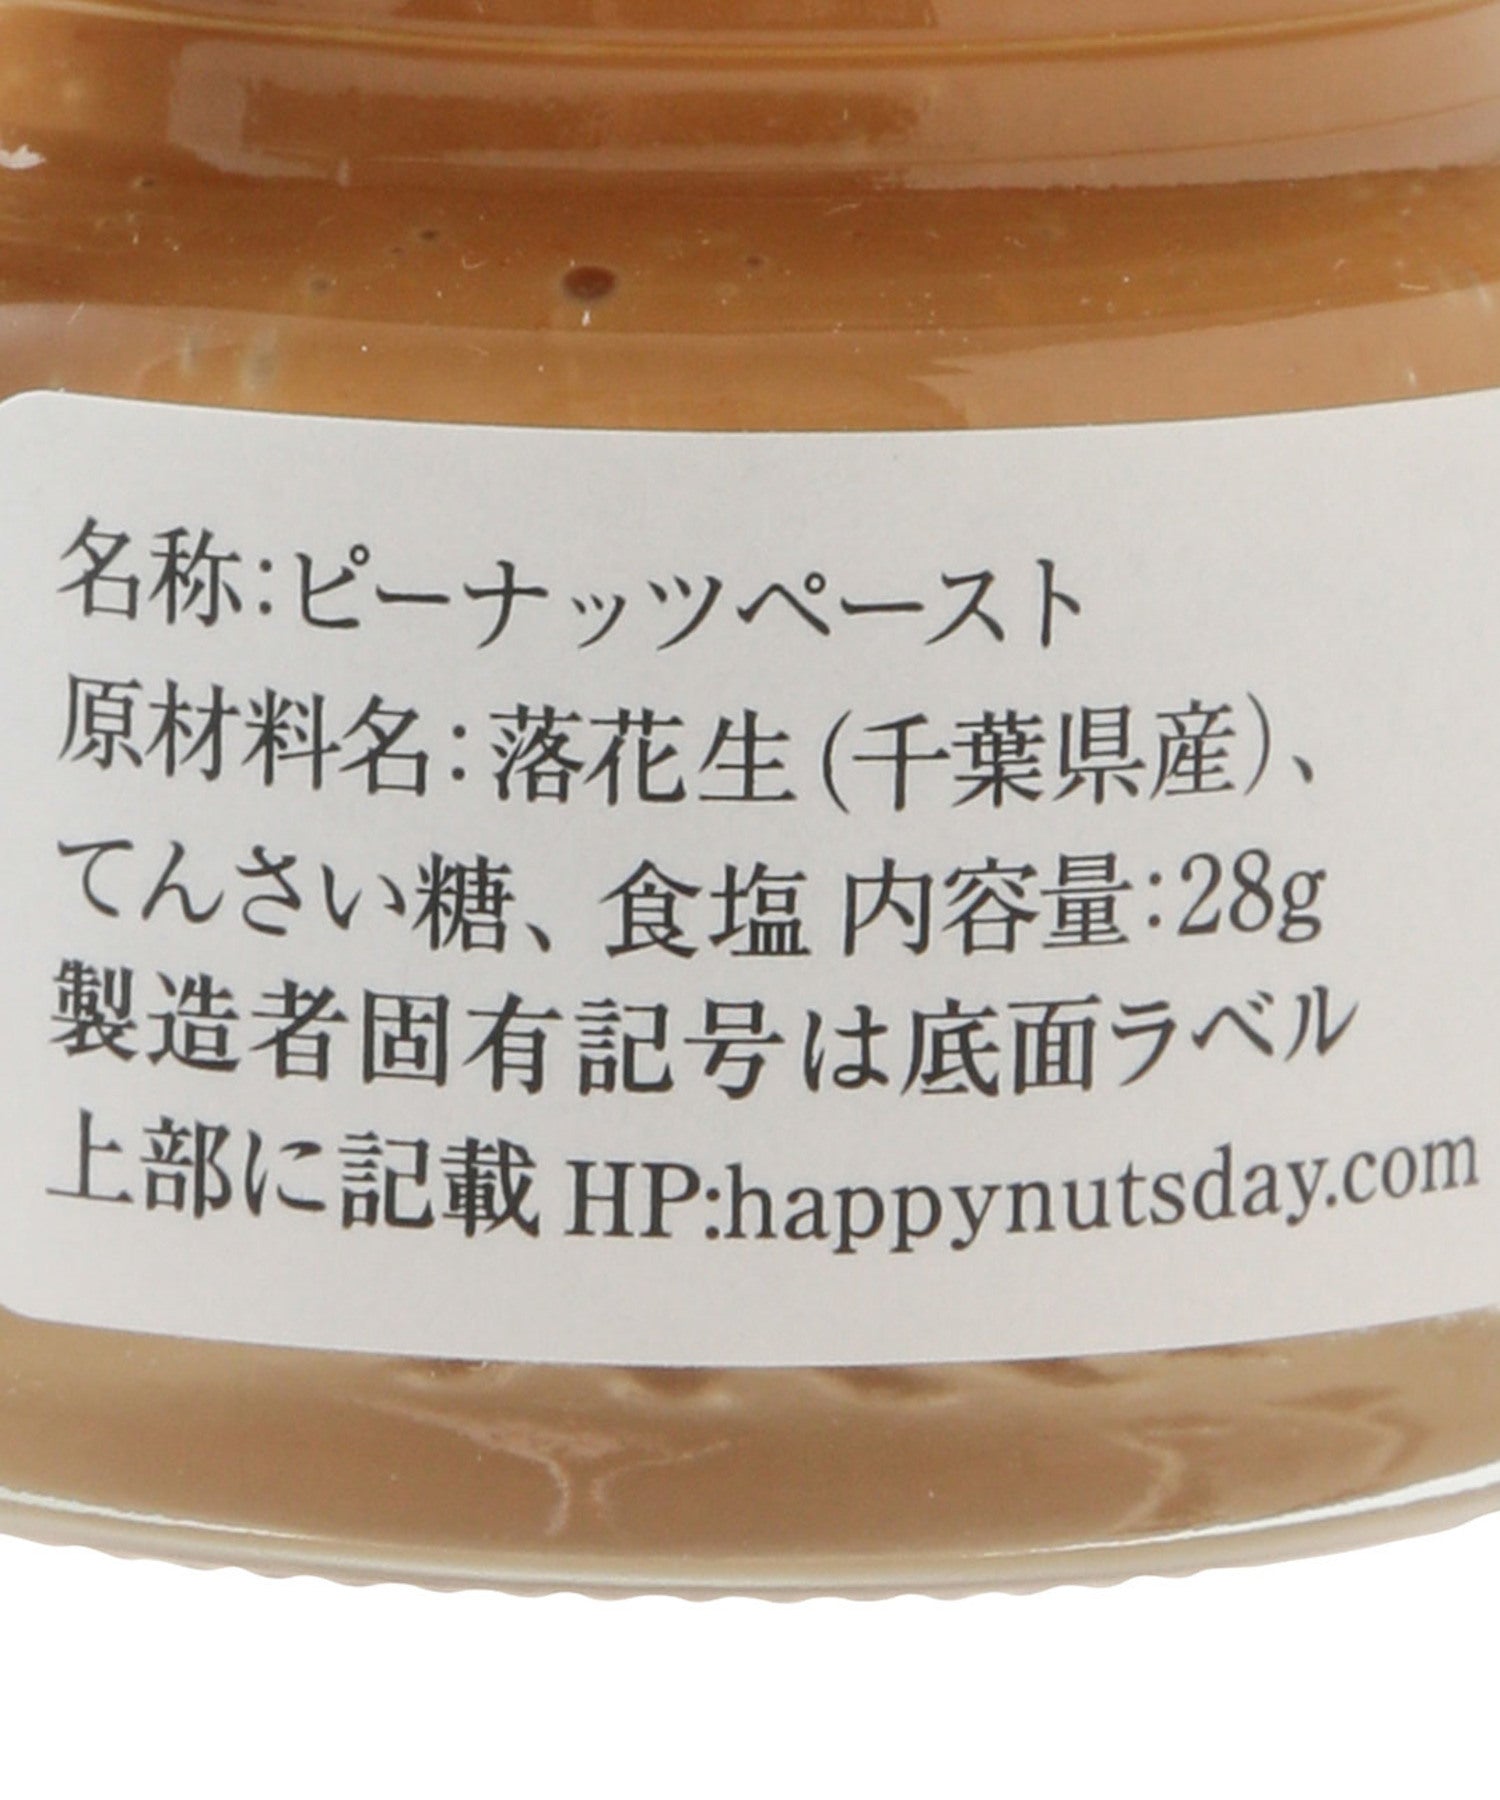 Happy Nuts Day ピーナッツバター 粒あり Xs Food Food 通販 Life And Beauty By Junonline